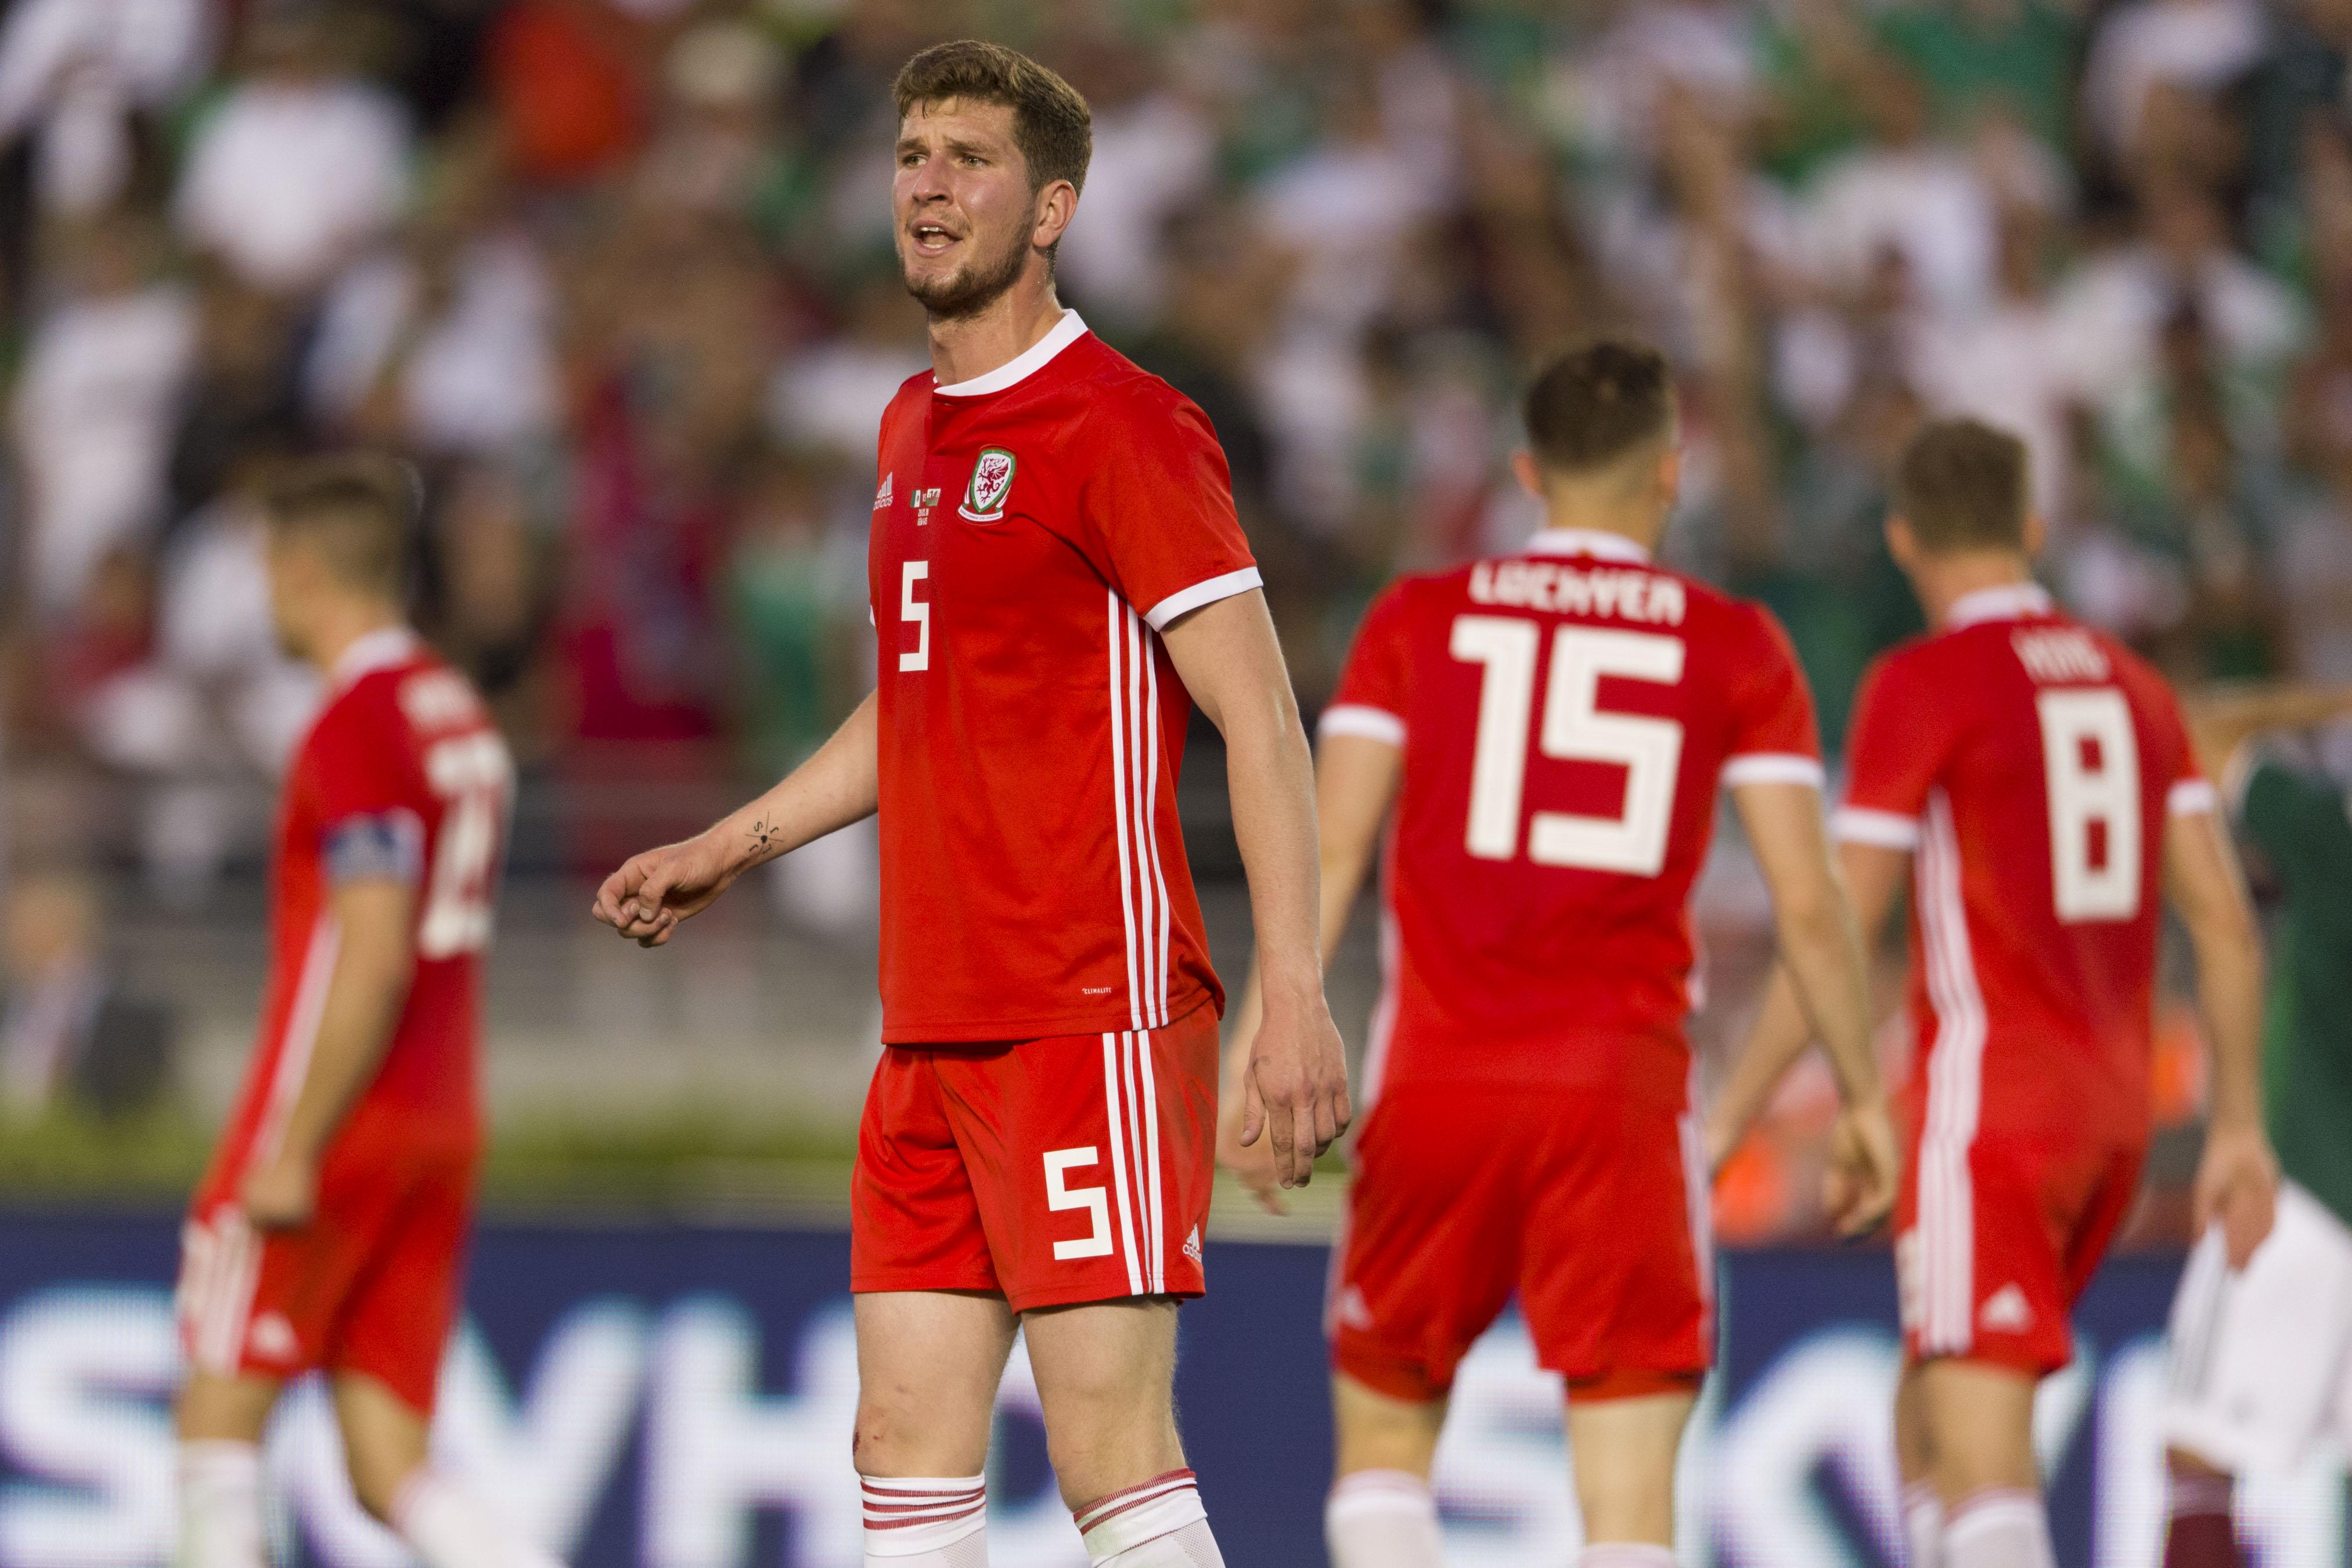 Wales vs Belgium Prediction, Odds, Line, Spread & How to Watch UEFA Nations League Match on FanDuel Sportsbook